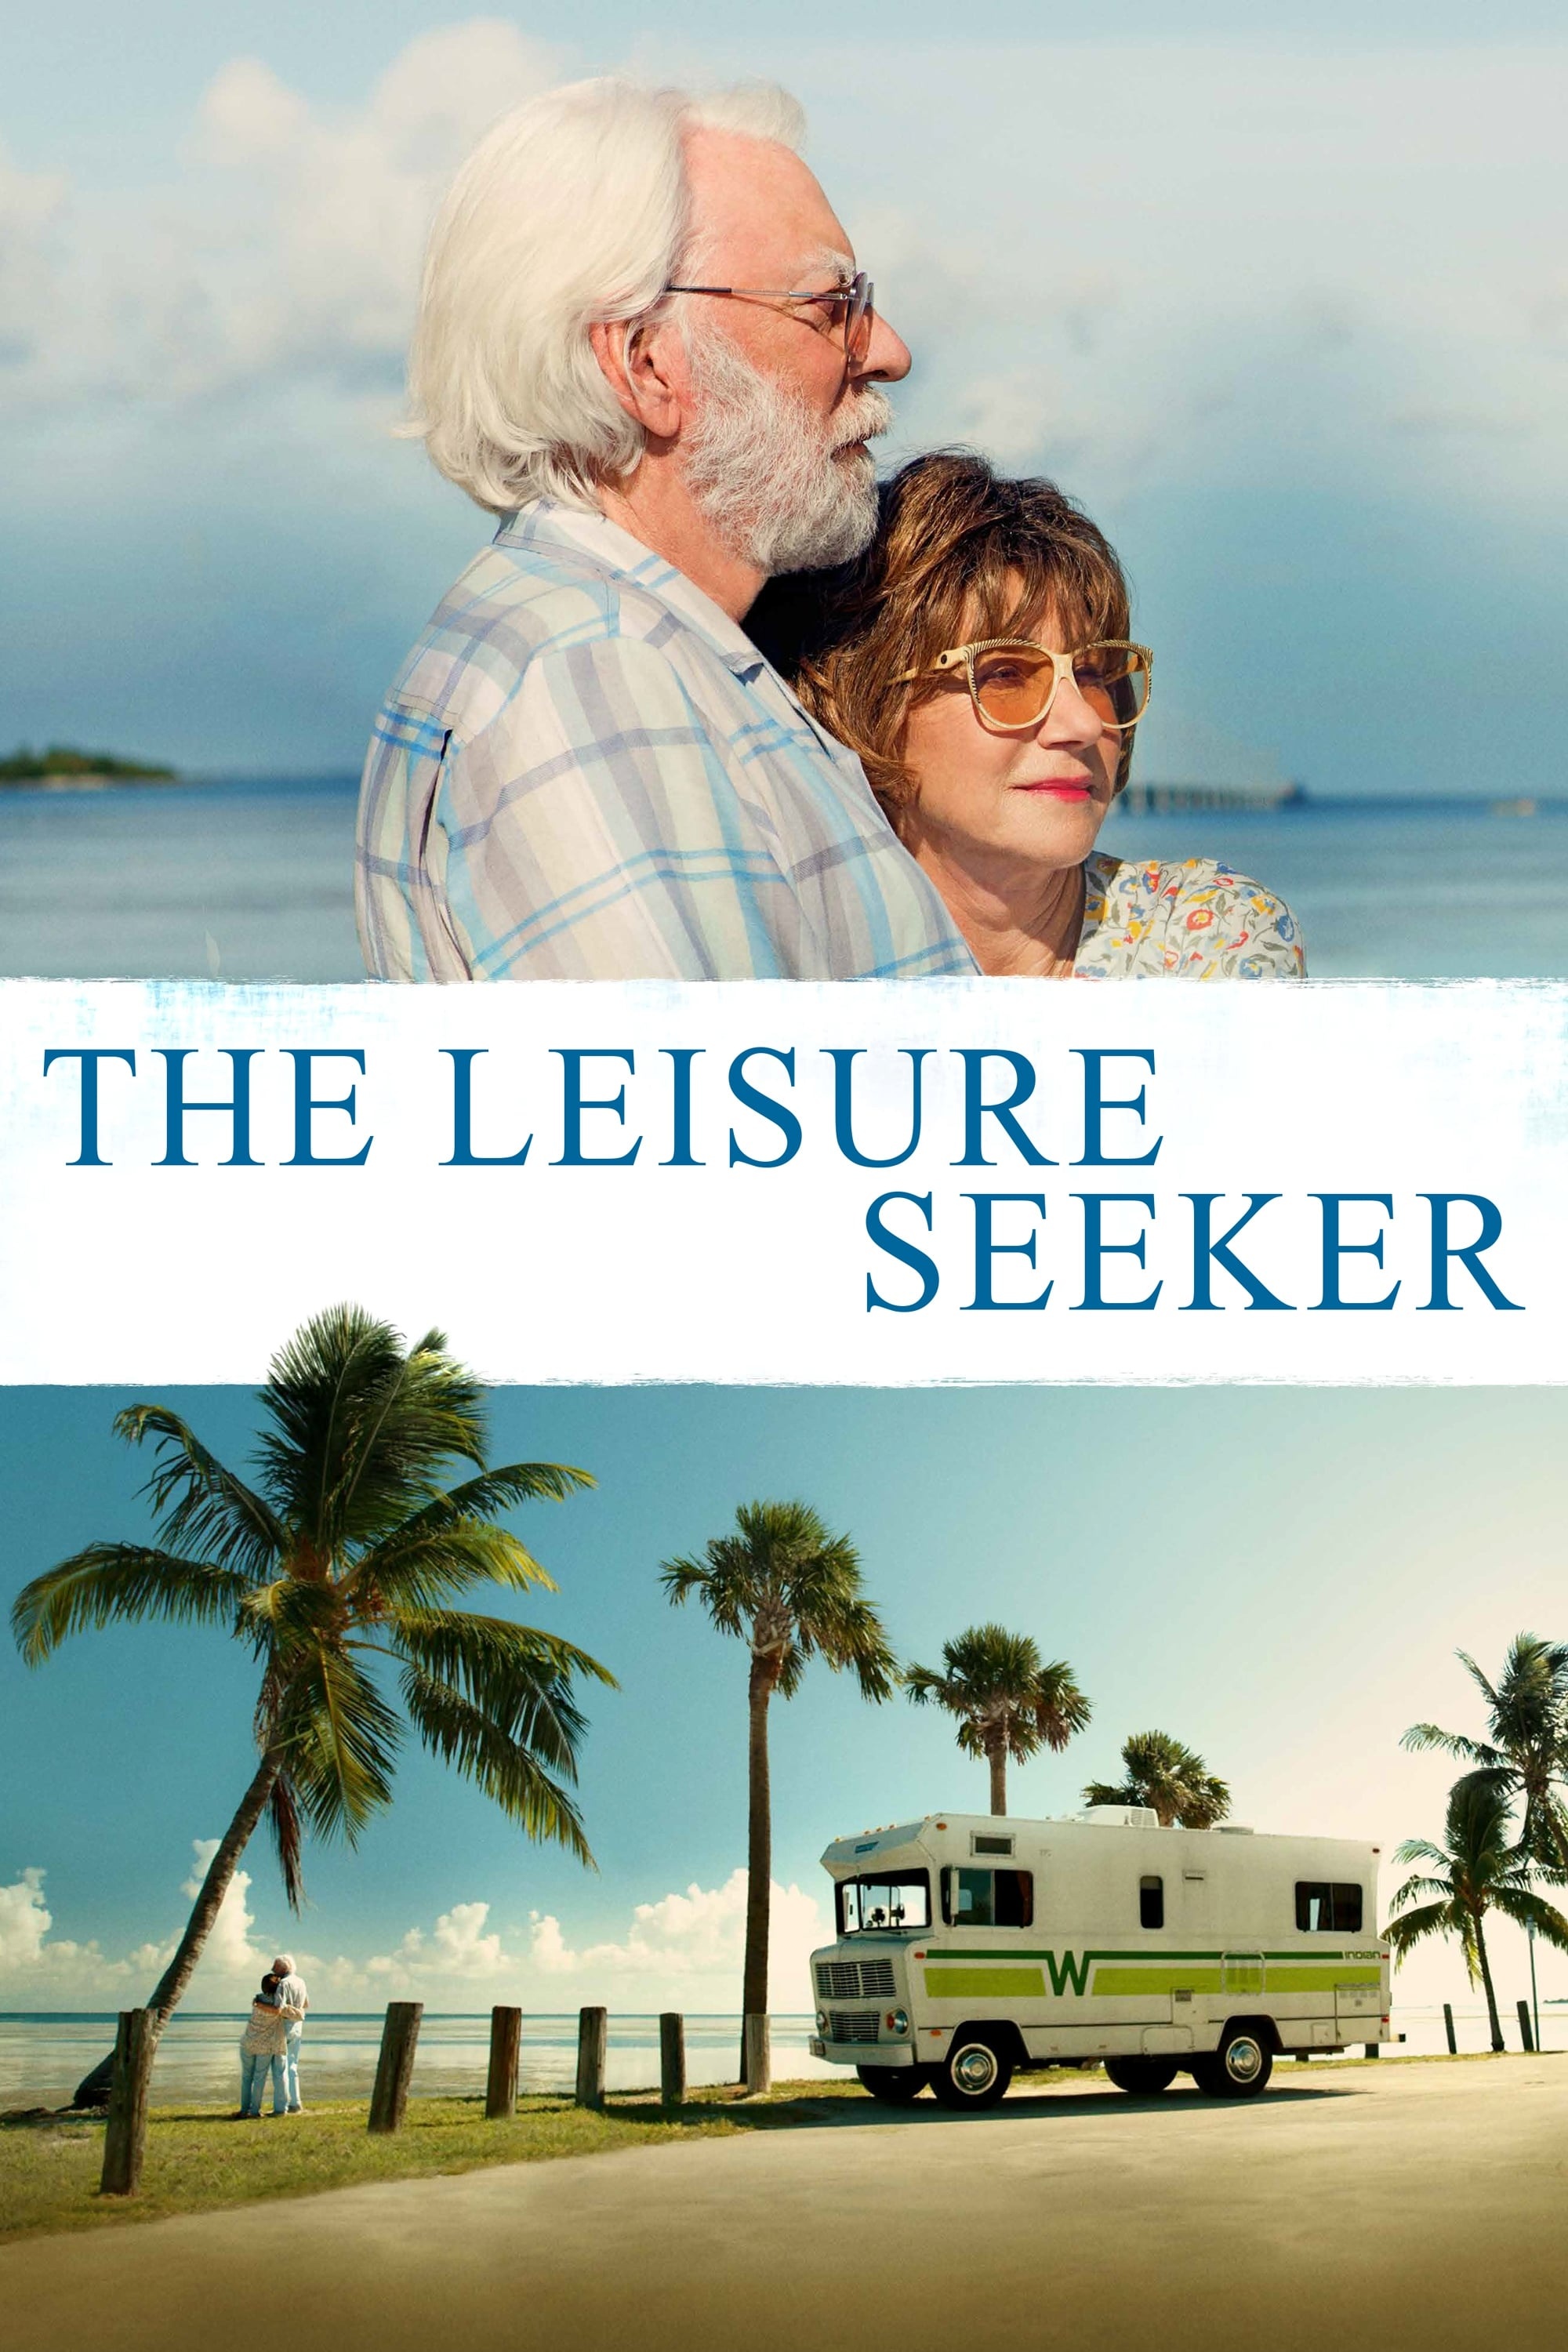 The Leisure Seeker, Captivating posters, Memorable film, Engaging characters, 2000x3000 HD Handy